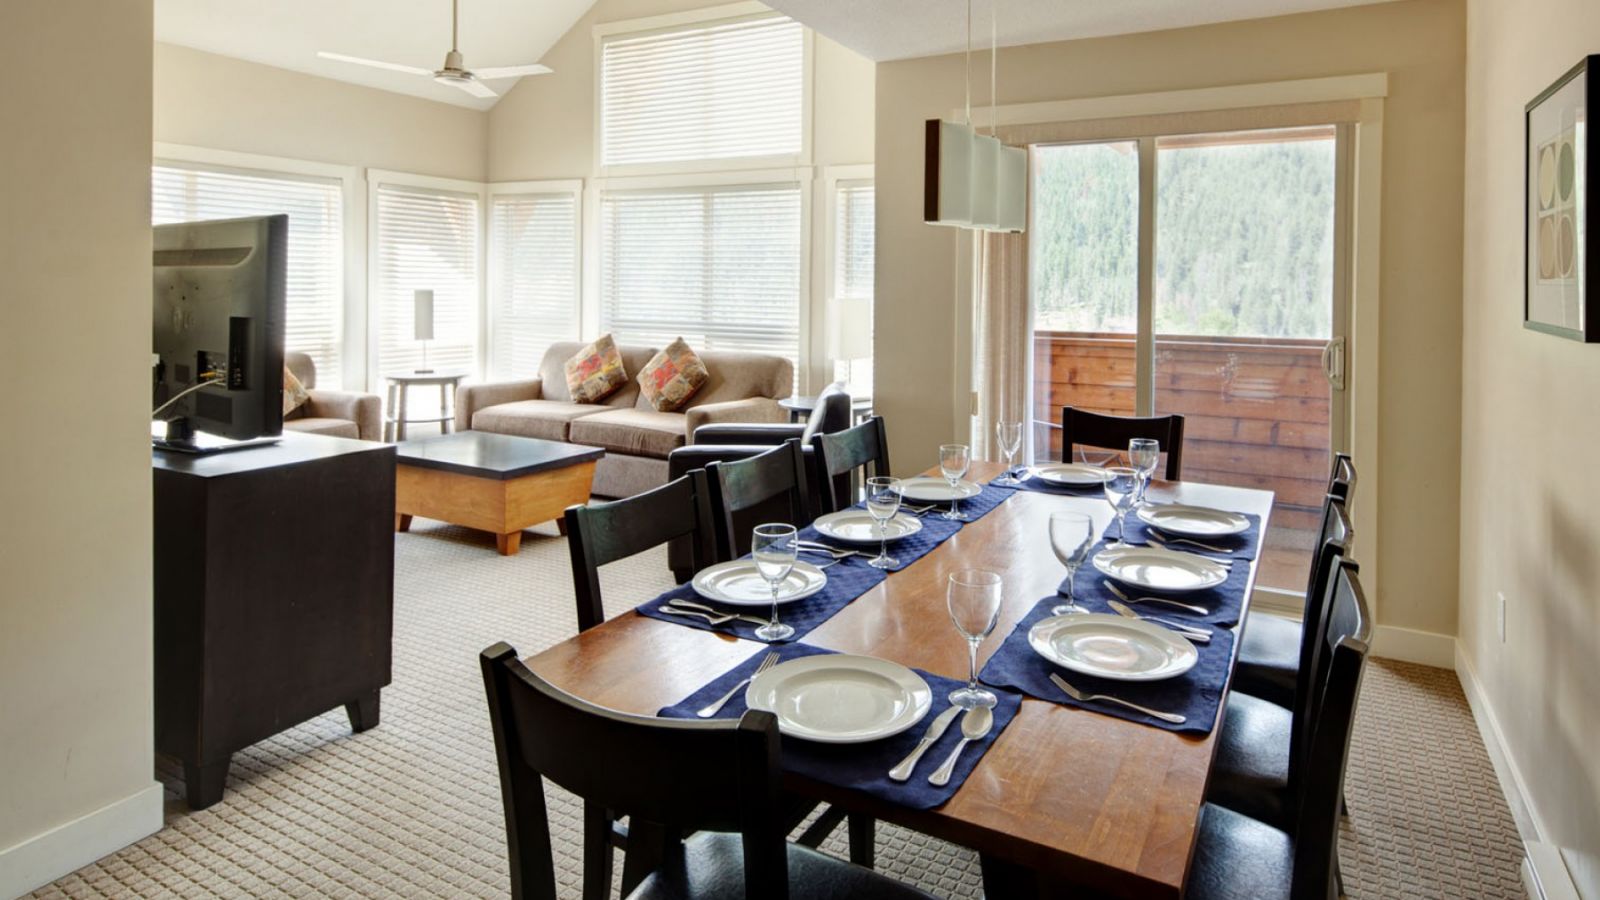 3 bedroom Townhouse - dining room